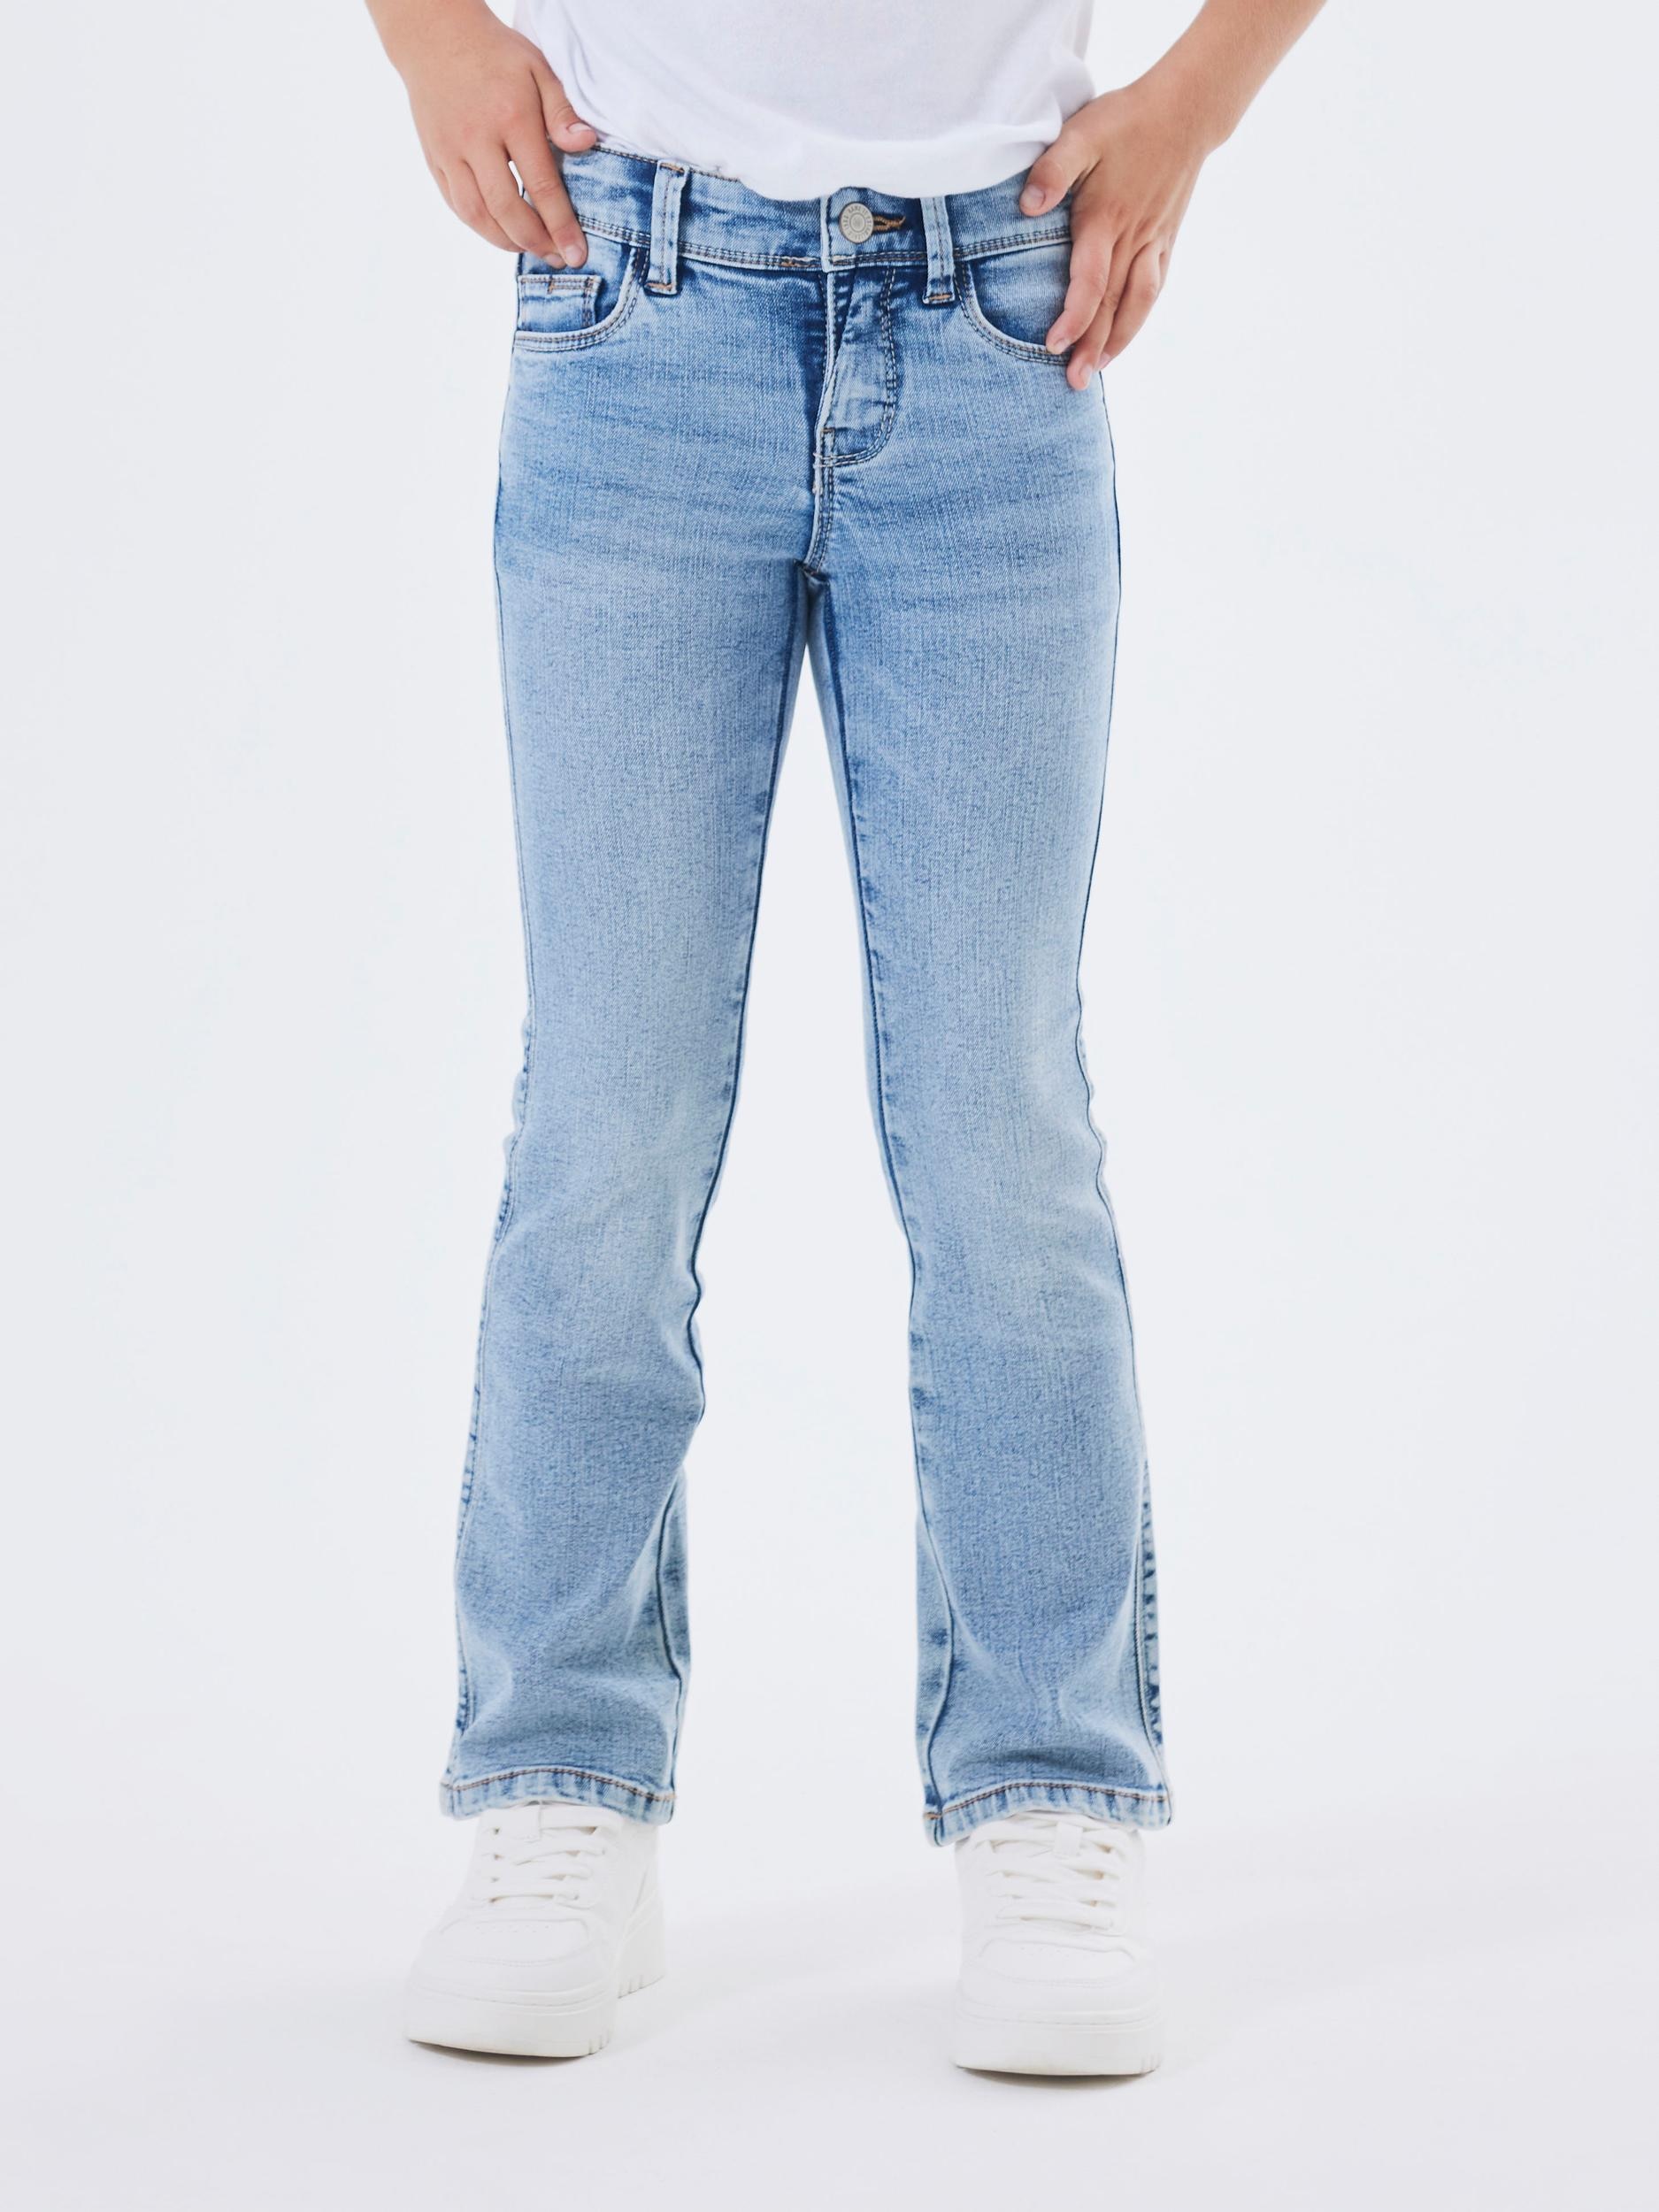 Bootcut-Jeans 1142-AU bestellen NOOS«, JEANS It Stretch BOOT »NKFPOLLY Name mit SKINNY